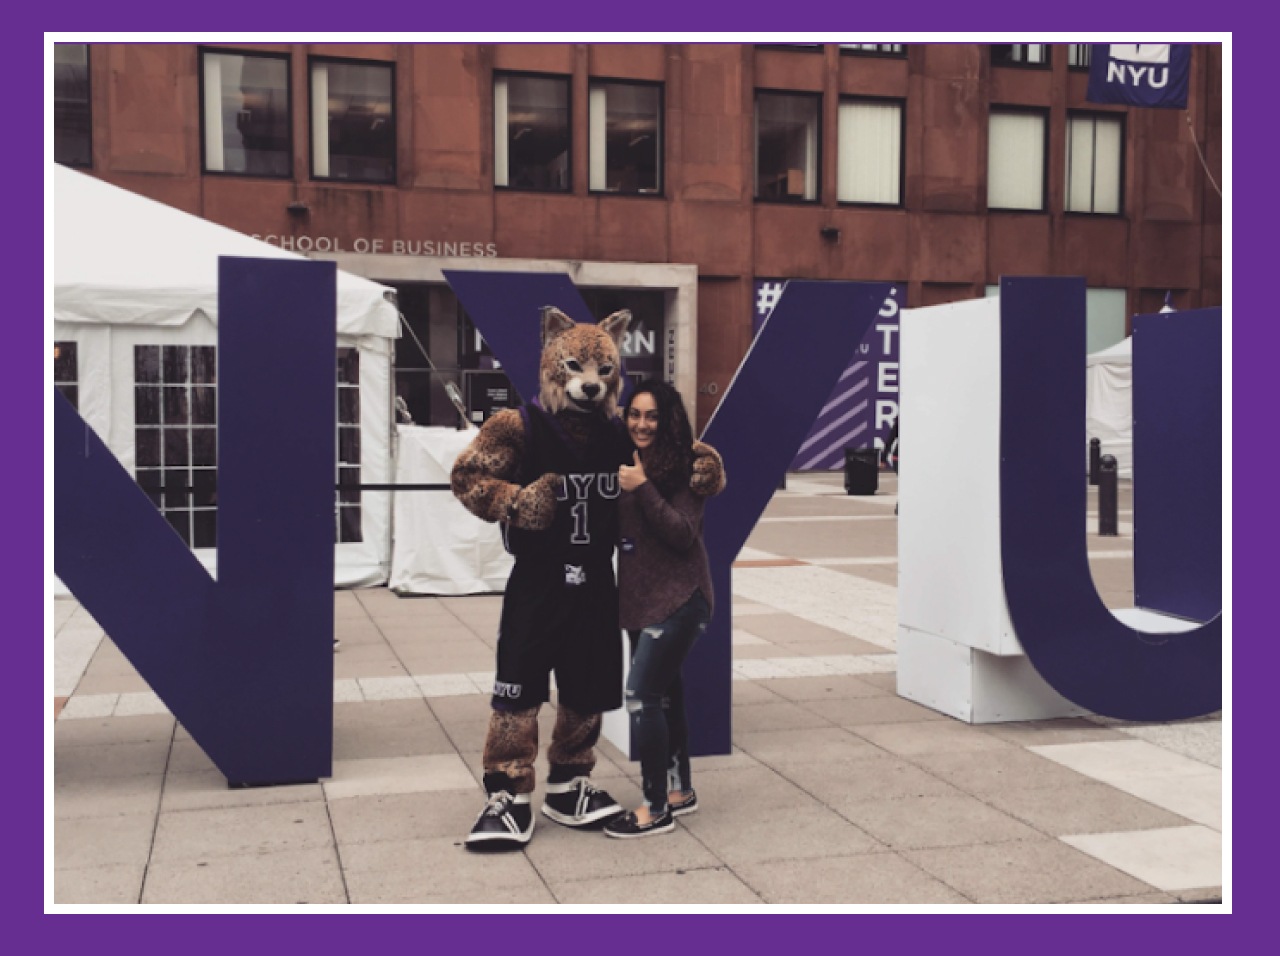 Yasmine posing with the NYU mascot in front of large block letters that read “NYU.”